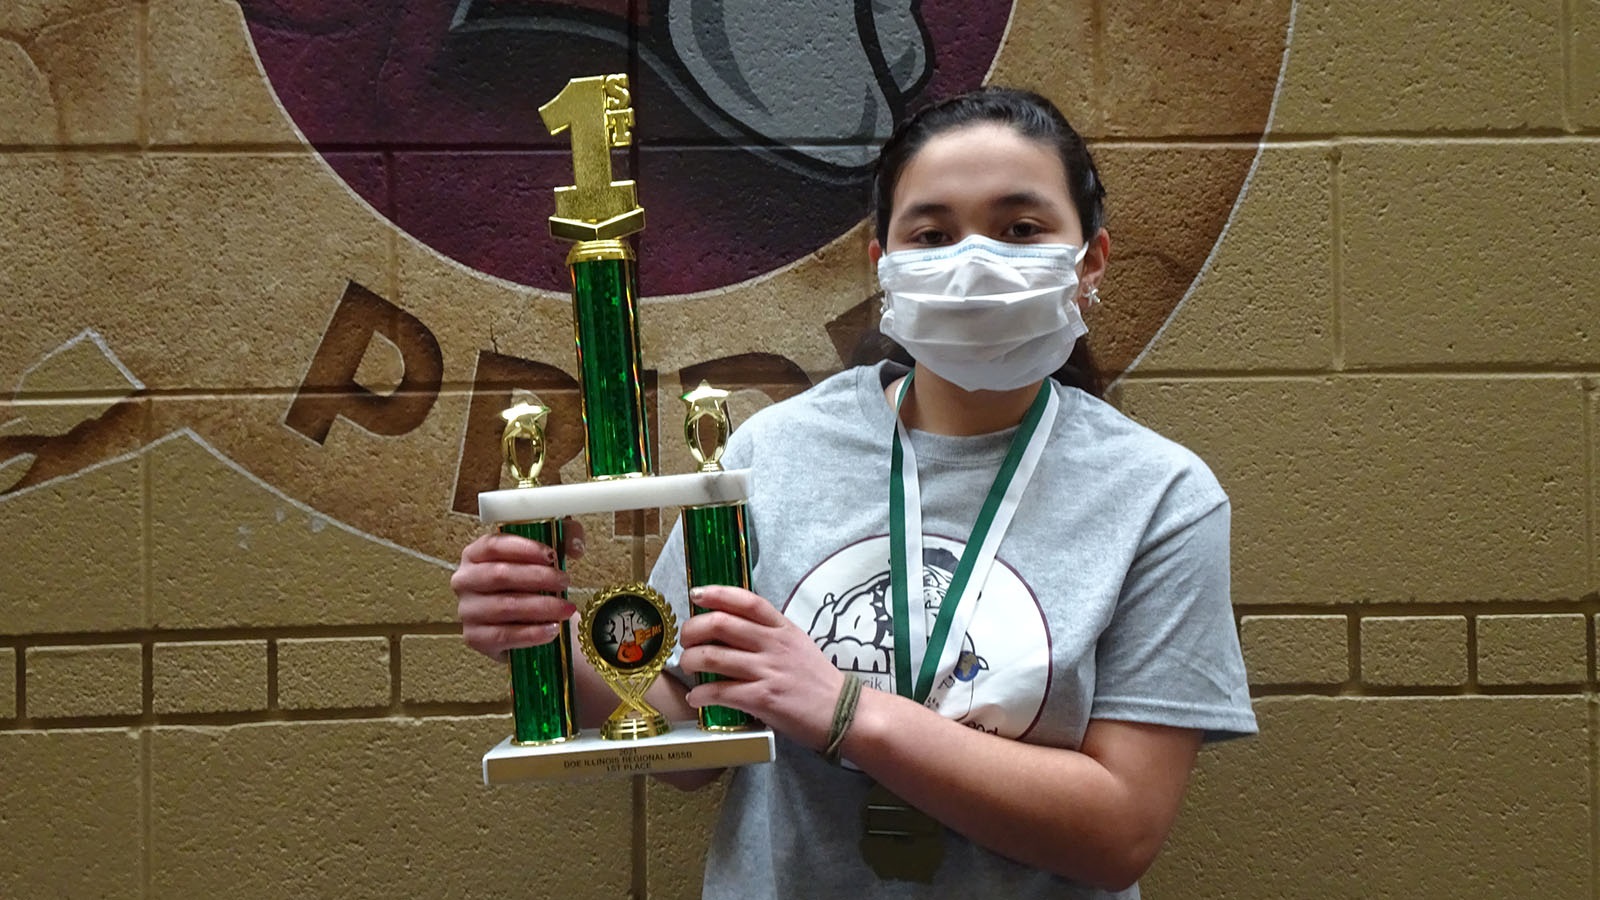 A student from Bednarcik Junior High School proudly displays her team’s first-place trophy from the 2021 Illinois Middle School Regional Science Bowl. (Image by Bednarcik Junior High School.)